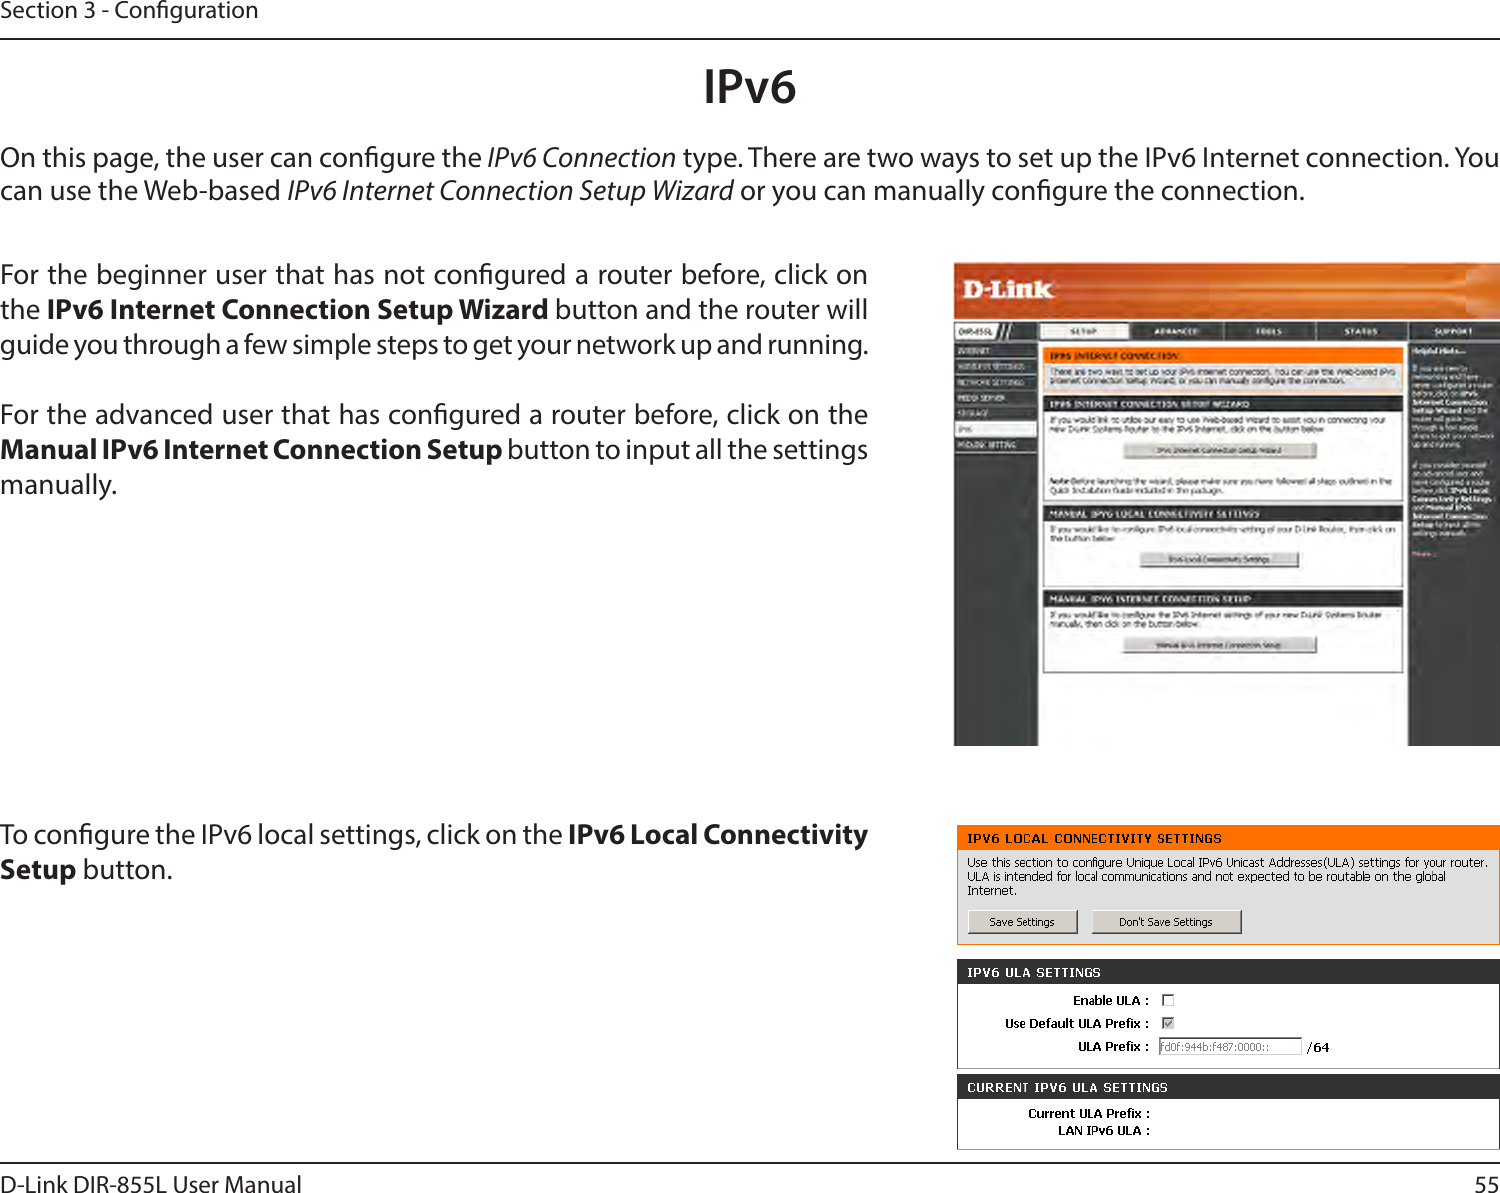 55D-Link DIR-855L User ManualSection 3 - CongurationIPv6On this page, the user can congure the IPv6 Connection type. There are two ways to set up the IPv6 Internet connection. You can use the Web-based IPv6 Internet Connection Setup Wizard or you can manually congure the connection.For the beginner user that has not congured a router before, click on the IPv6InternetConnectionSetupWizardbutton and the router will guide you through a few simple steps to get your network up and running.For the advanced user that has congured a router before, click on the Manual IPv6 Internet Connection Setup button to input all the settings manually.To congure the IPv6 local settings, click on the IPv6 Local Connectivity Setup button.